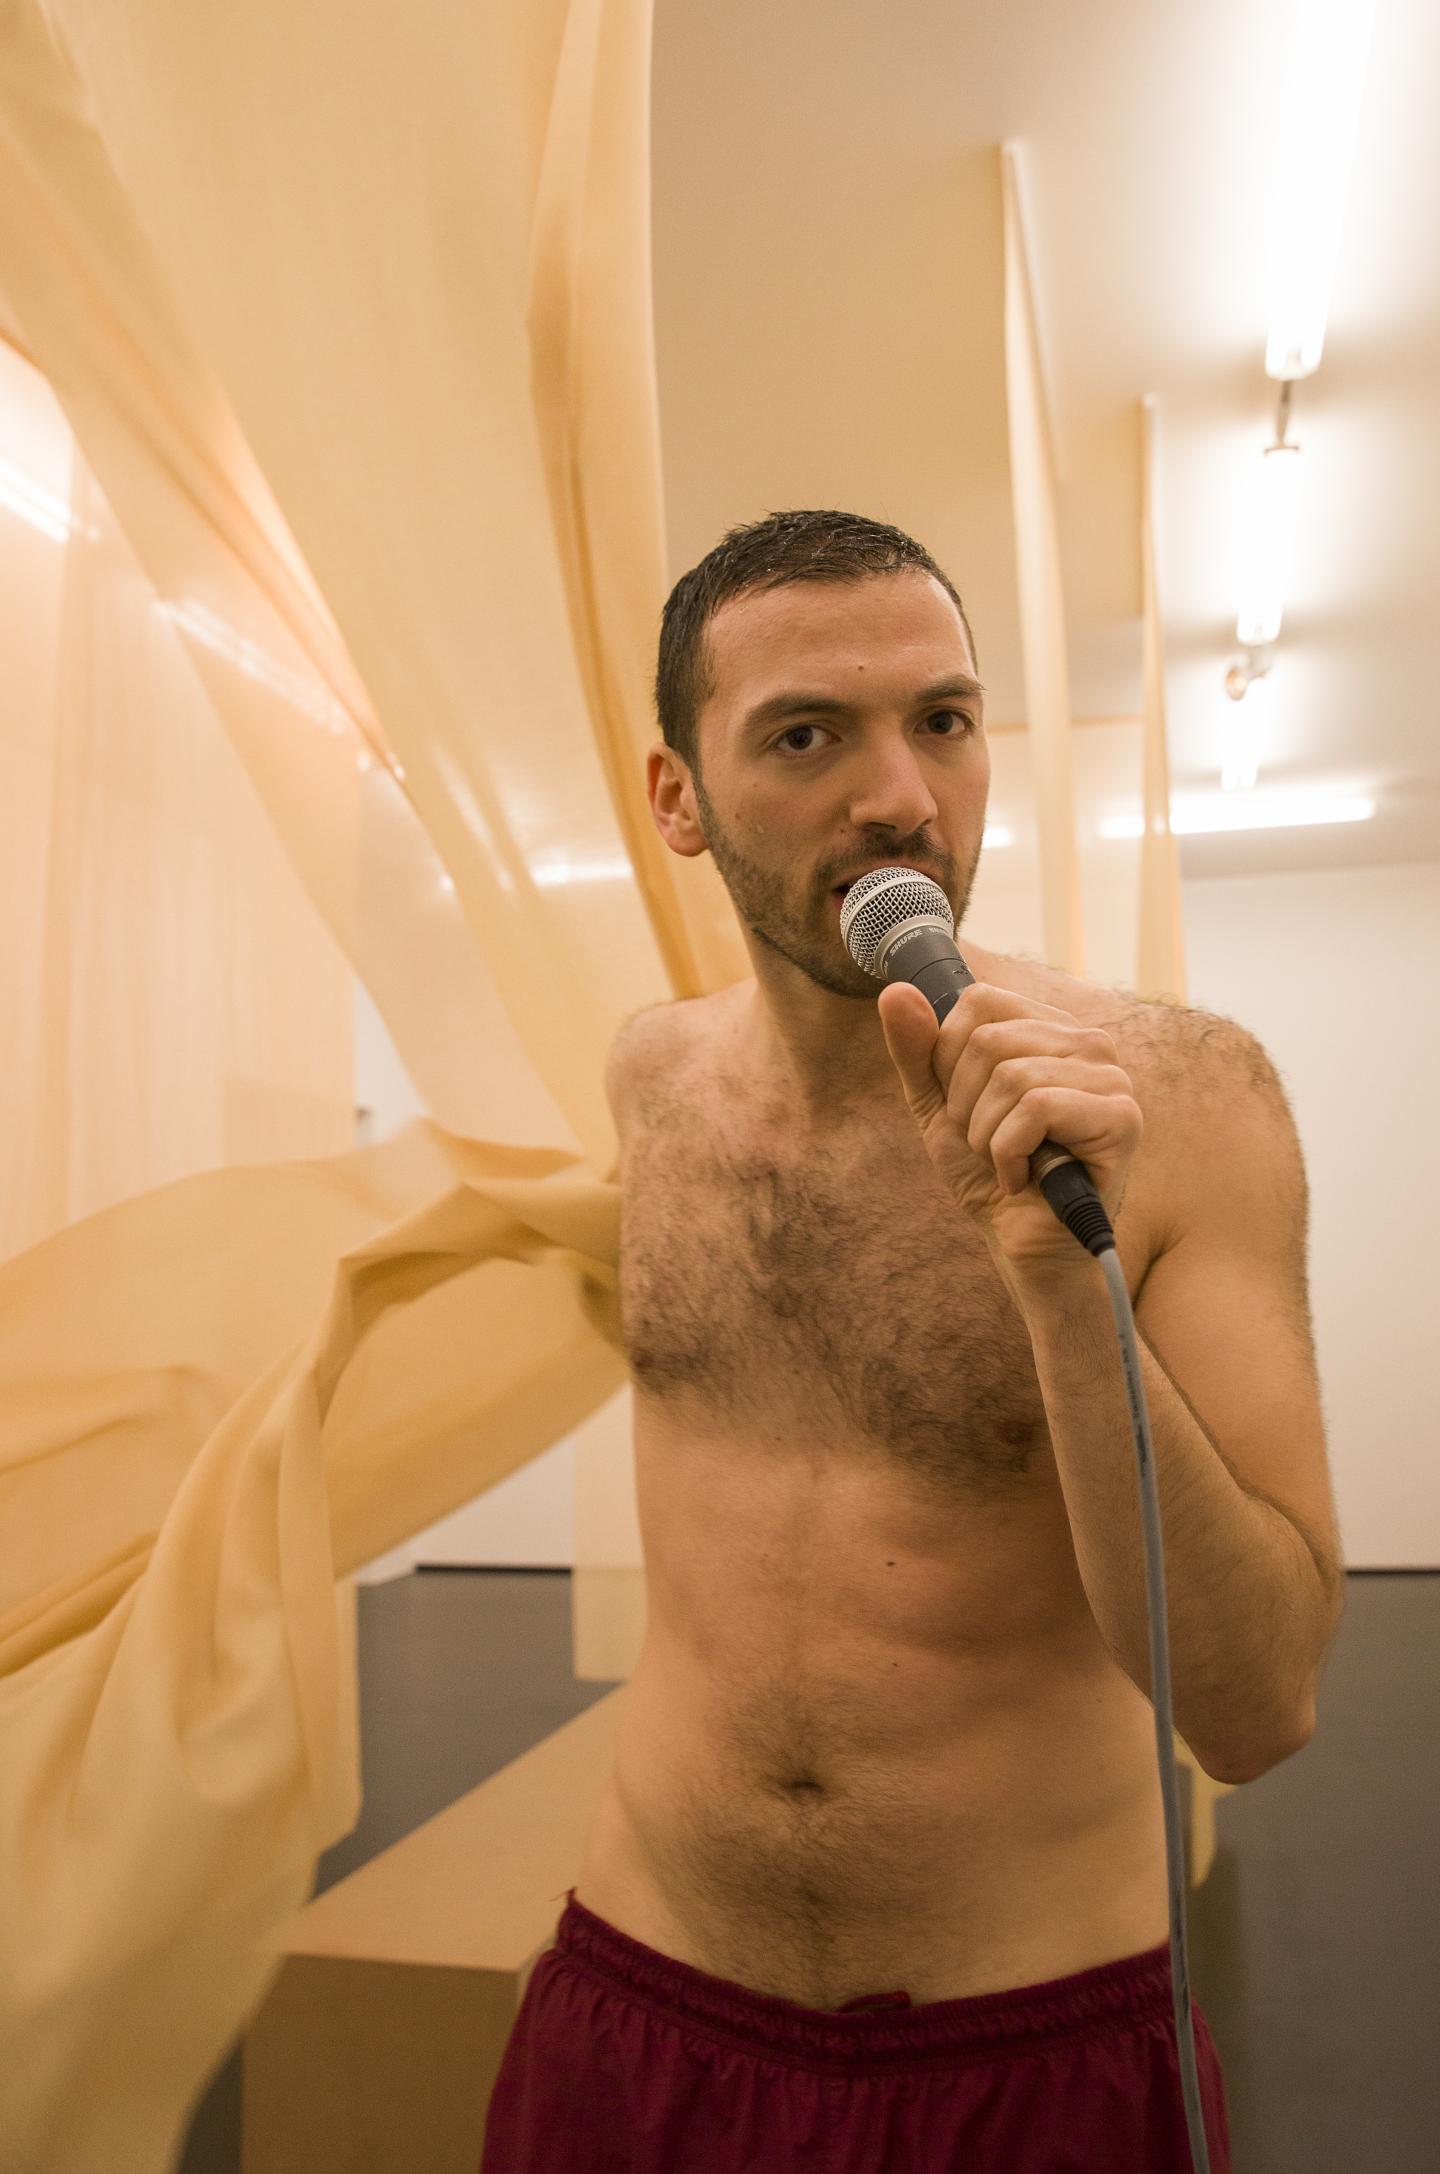 artist speaking into microphone and grabbing transparent curtain